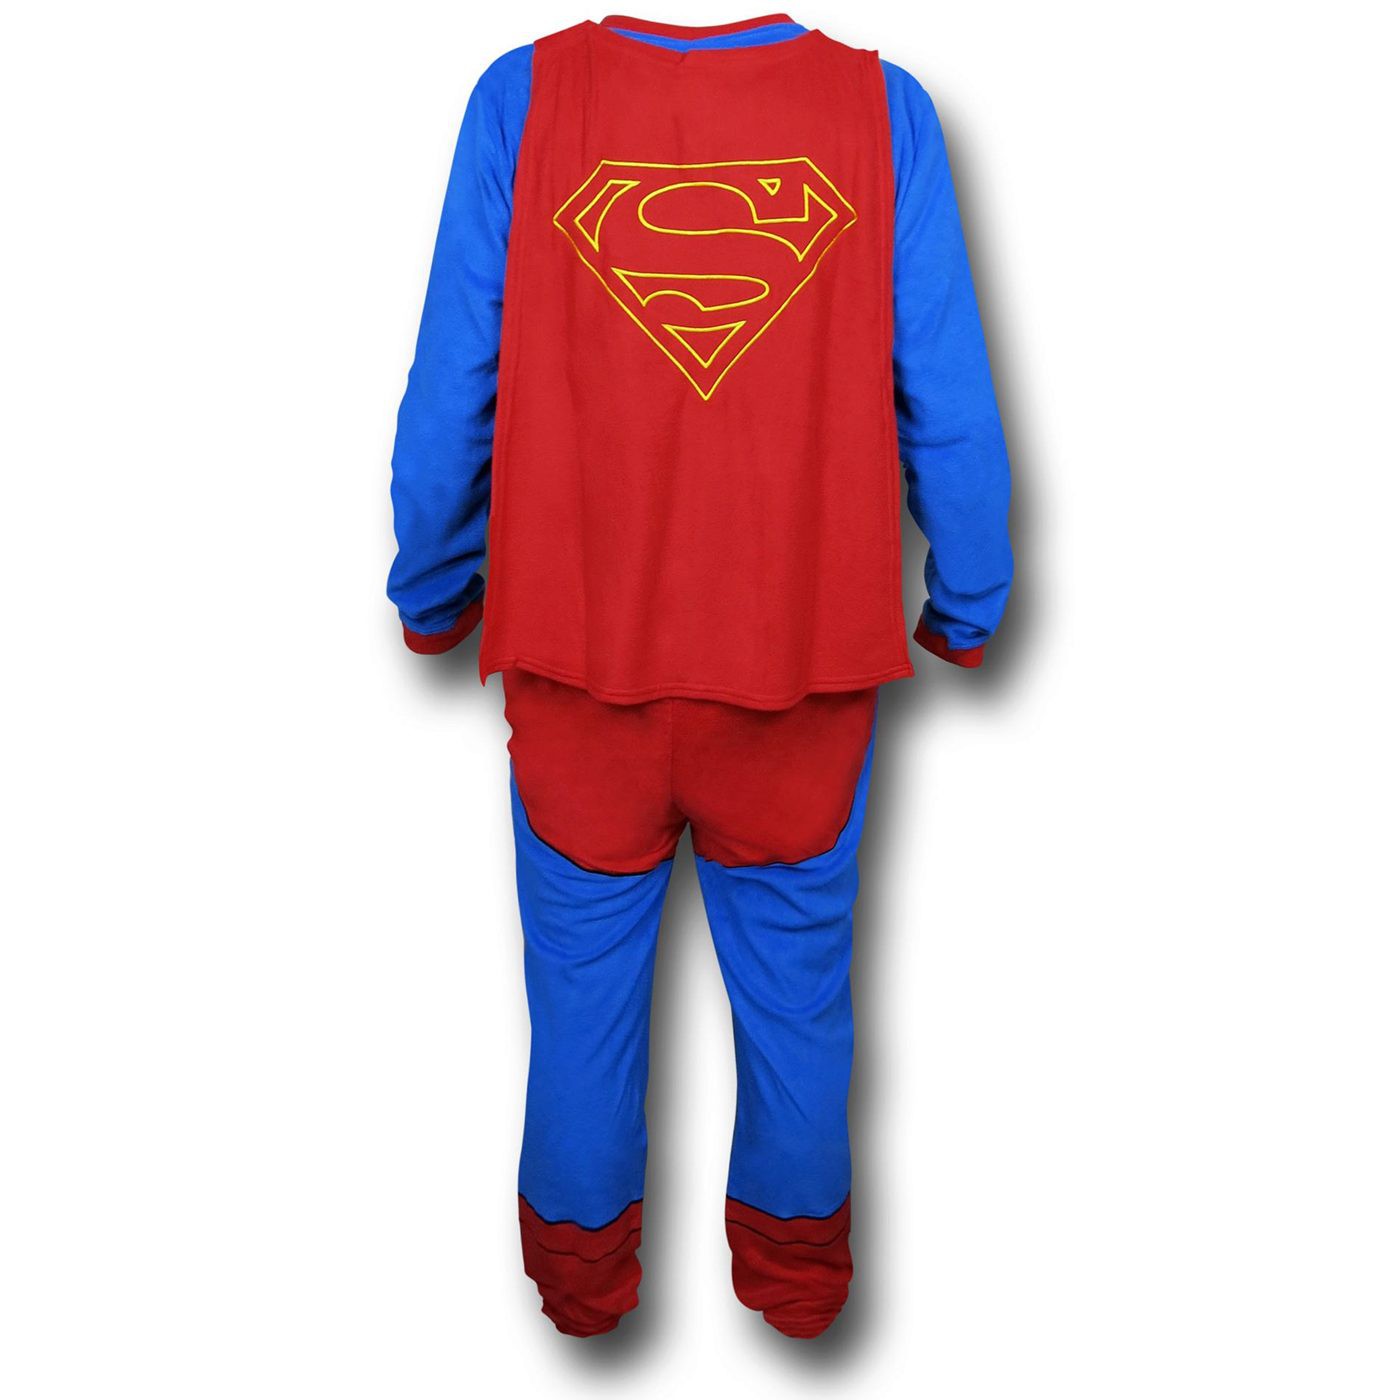 Superman Belted & Caped Union Suit